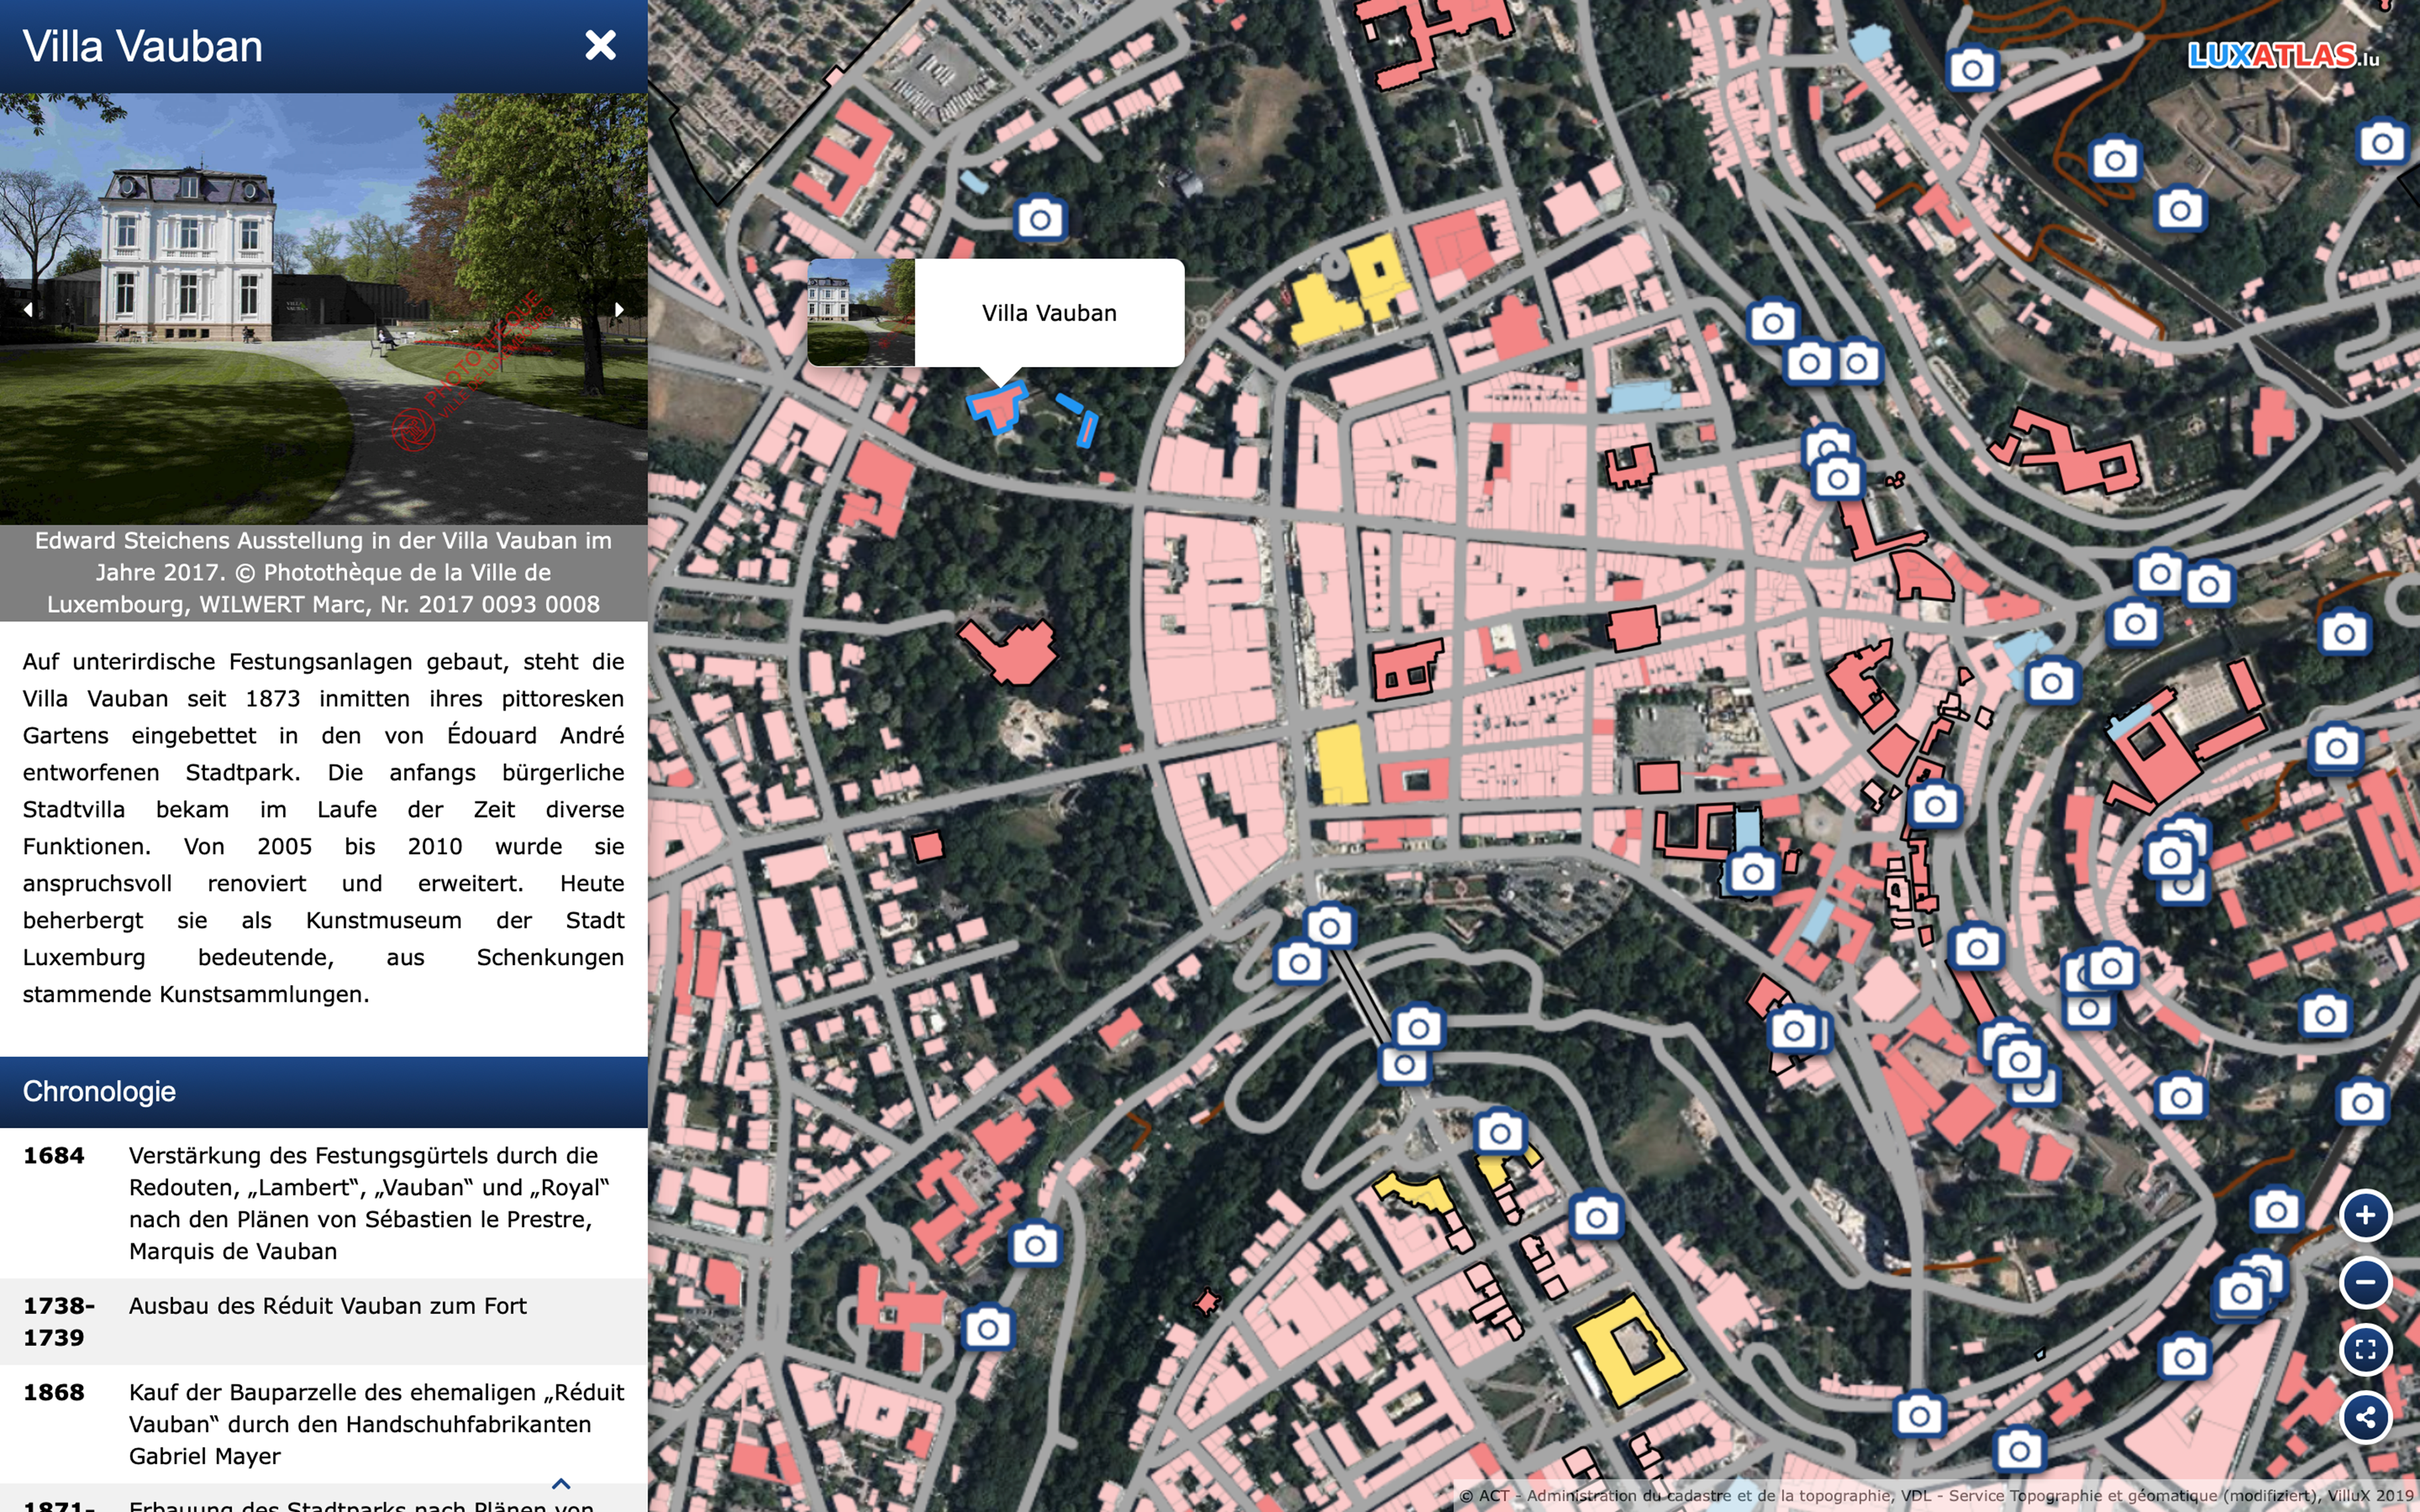 On click integration of explanatory texts, pictures, photos and plans for selected buildings